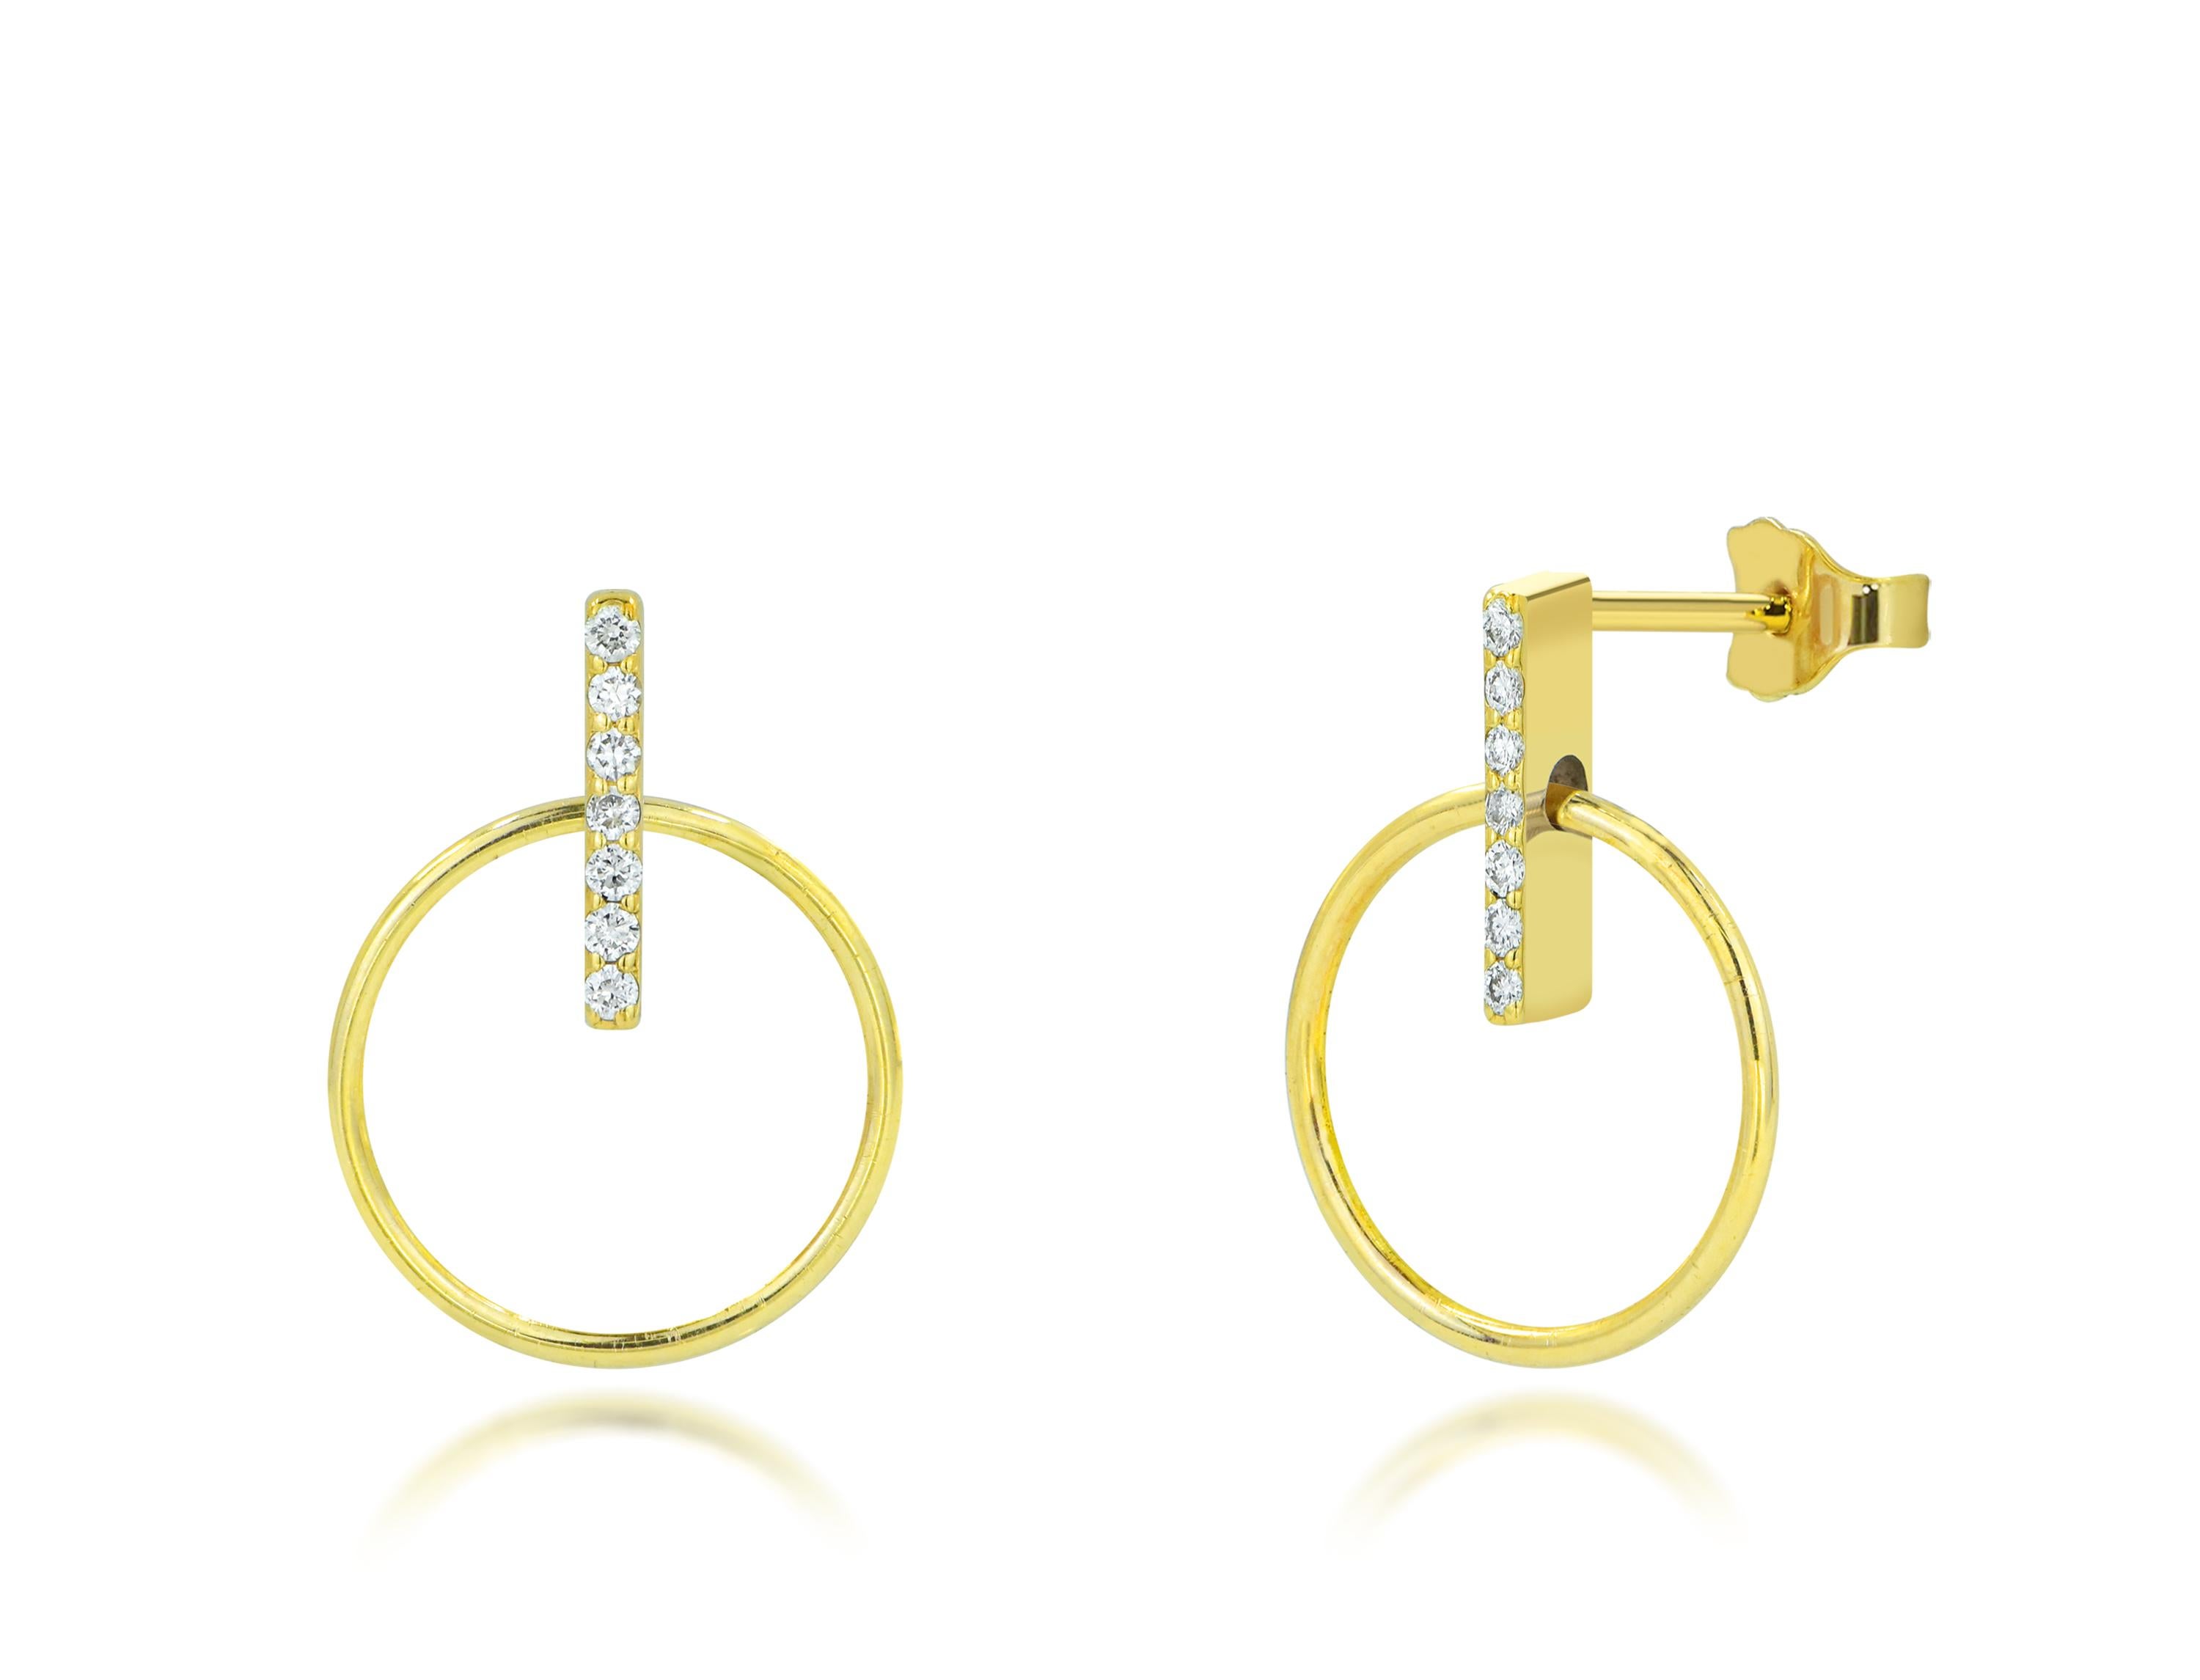 Unique Diamond Earrings in 14k solid gold.
Available in three colors of gold: White Gold / Rose Gold / Yellow Gold.

These Dainty Stud Earrings are made of 14k solid gold featuring shiny brilliant round cut natural diamonds set by master setter in